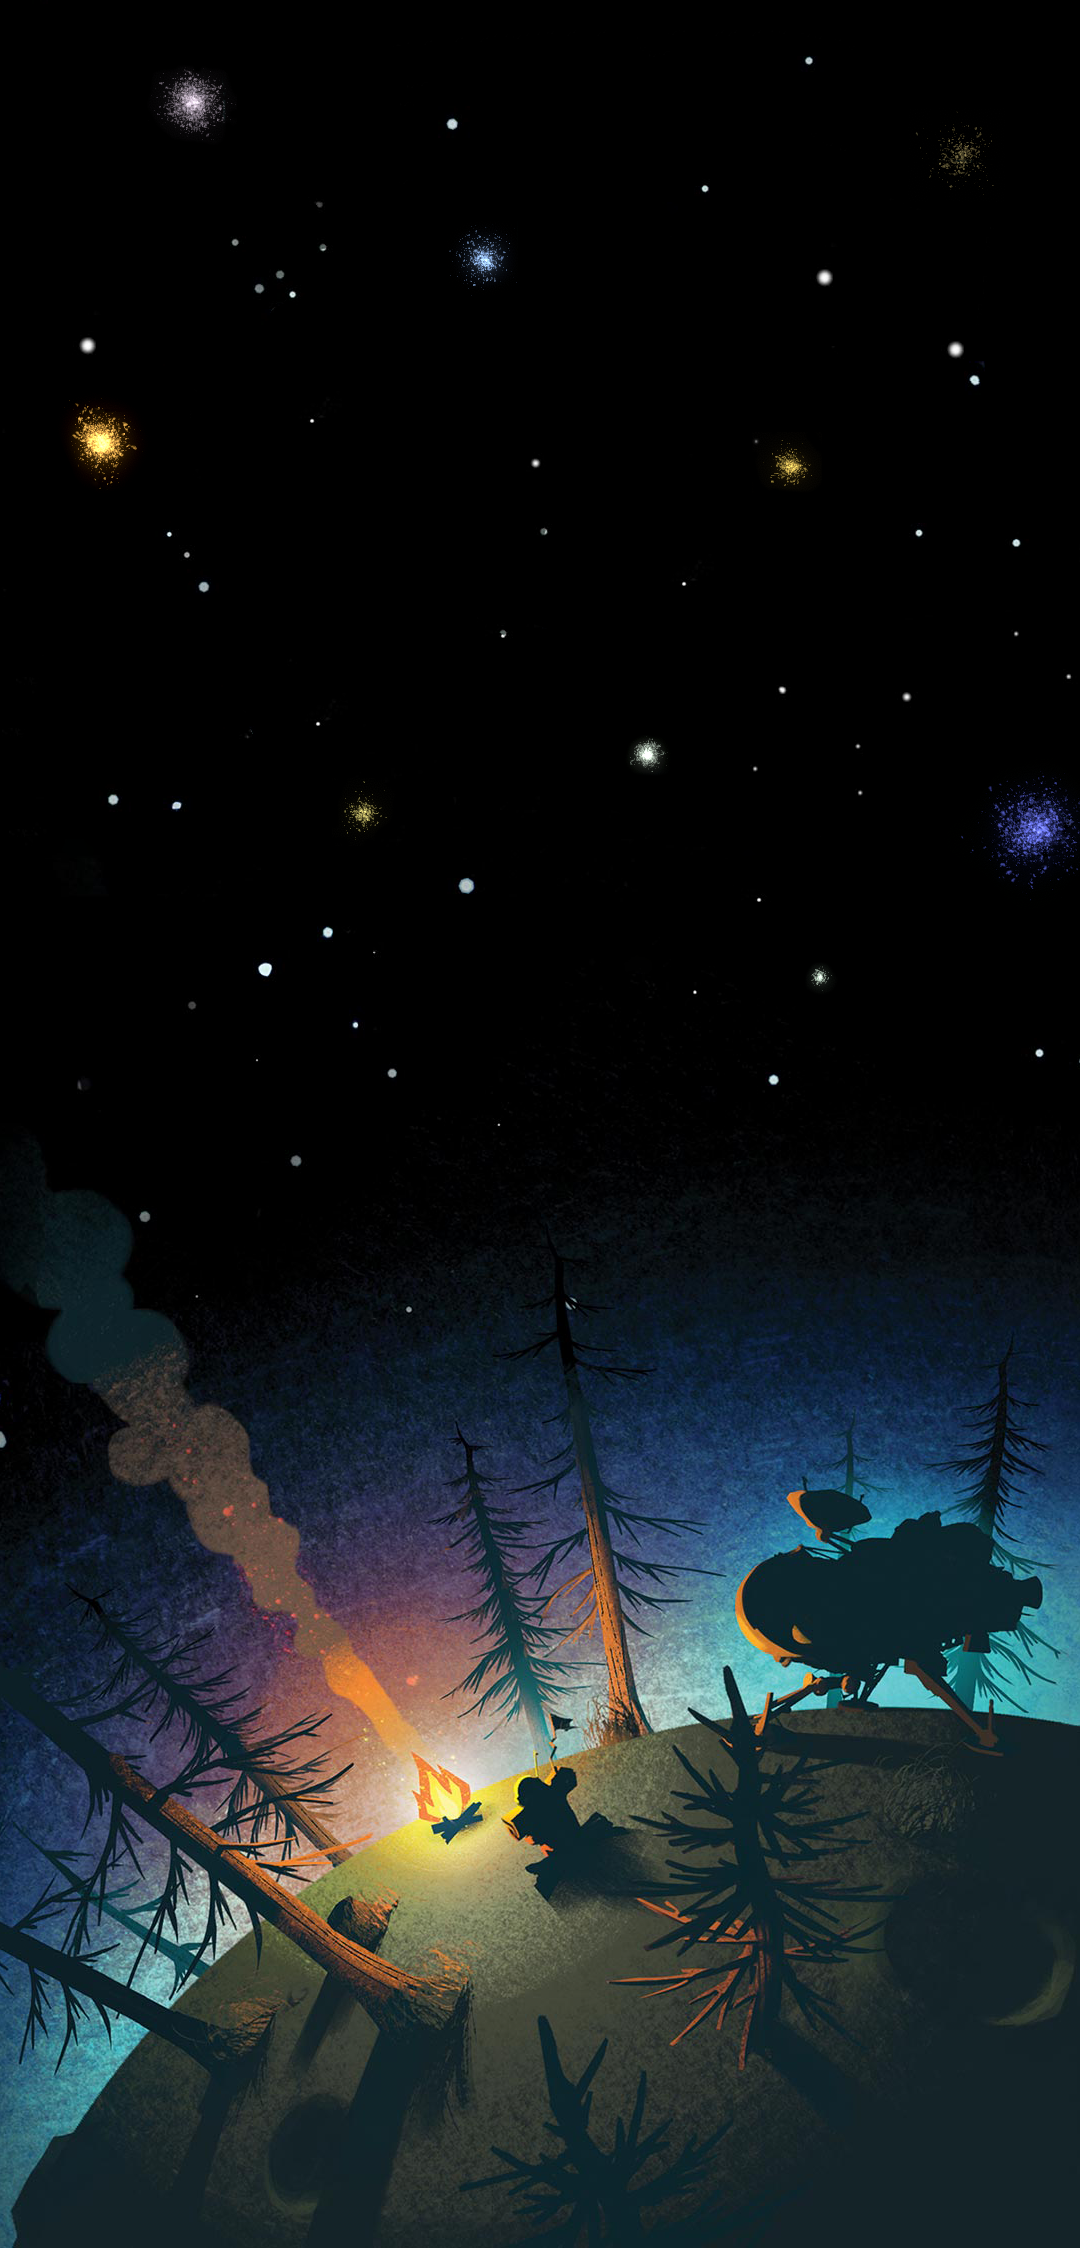 SPOILER] An upgraded, higher quality phone wallpaper [1080x2248